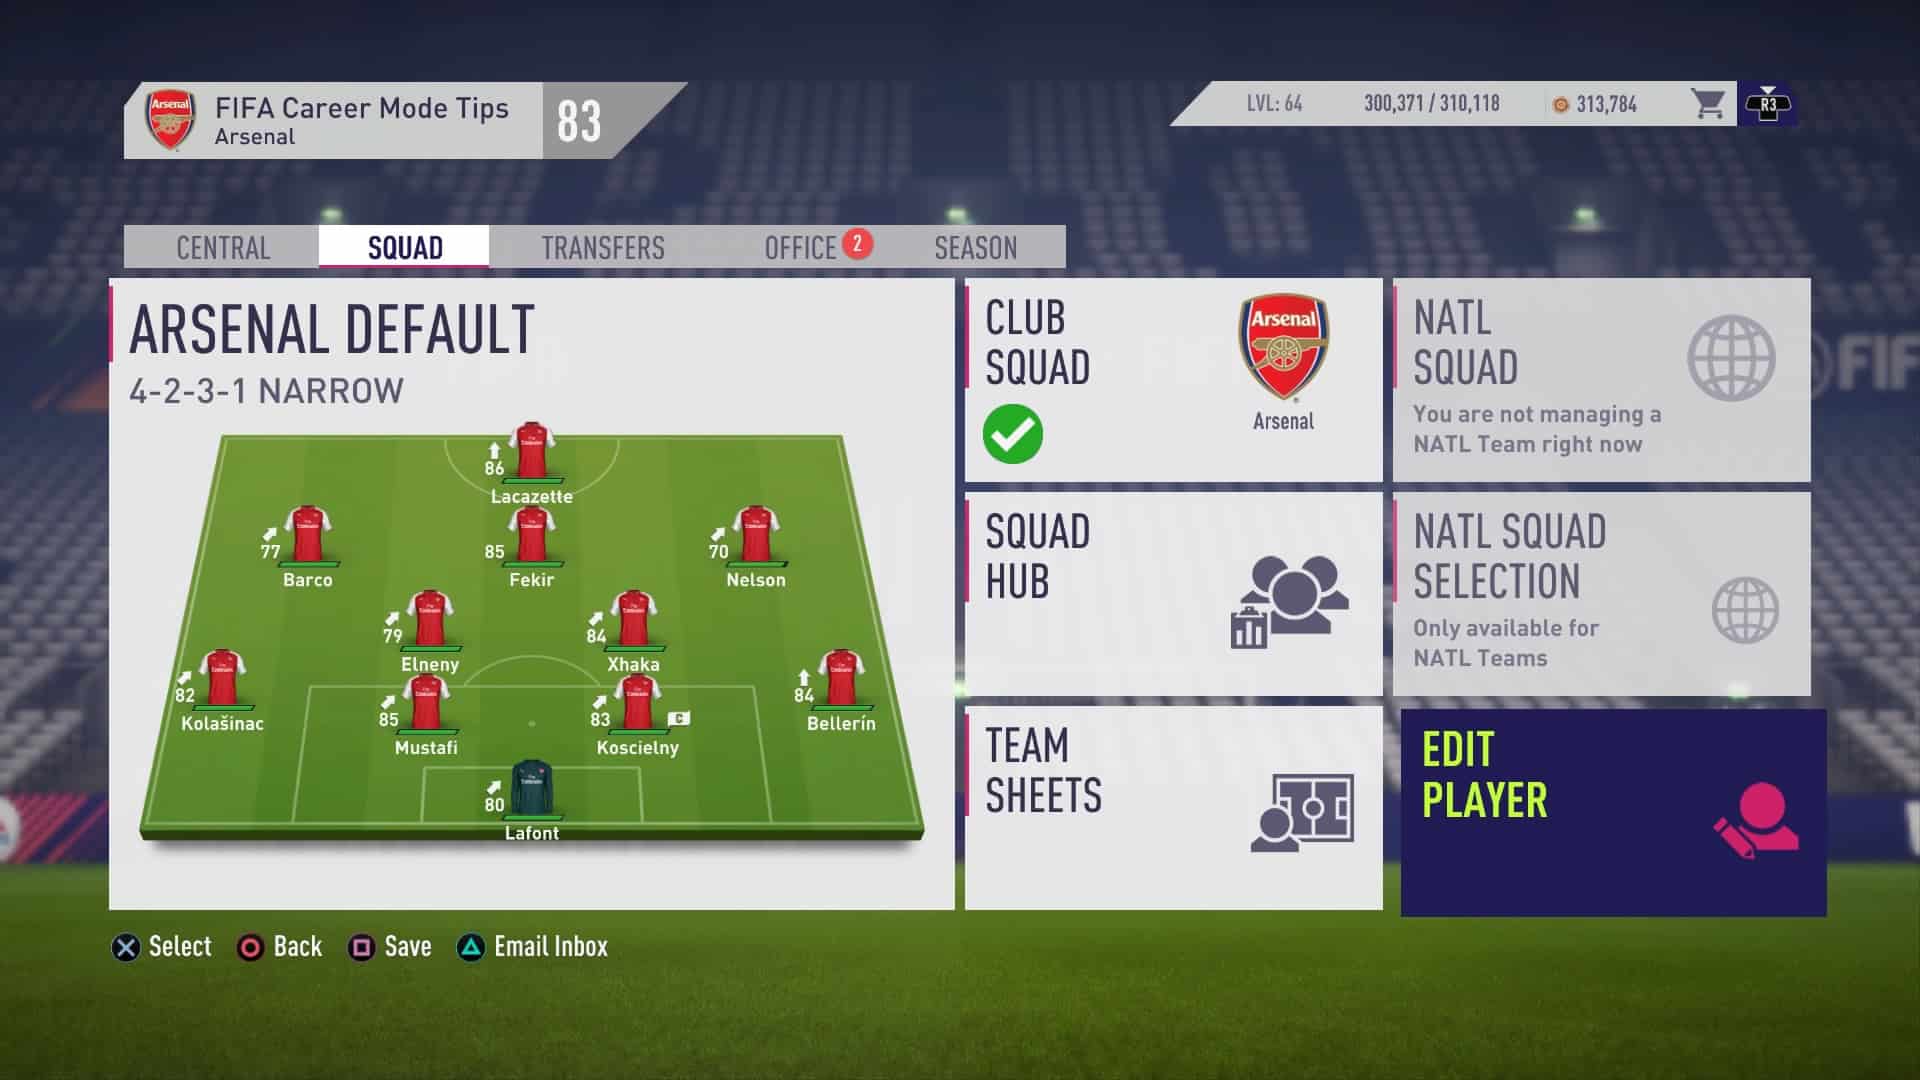 How to Edit Player Appearance in FIFA 18